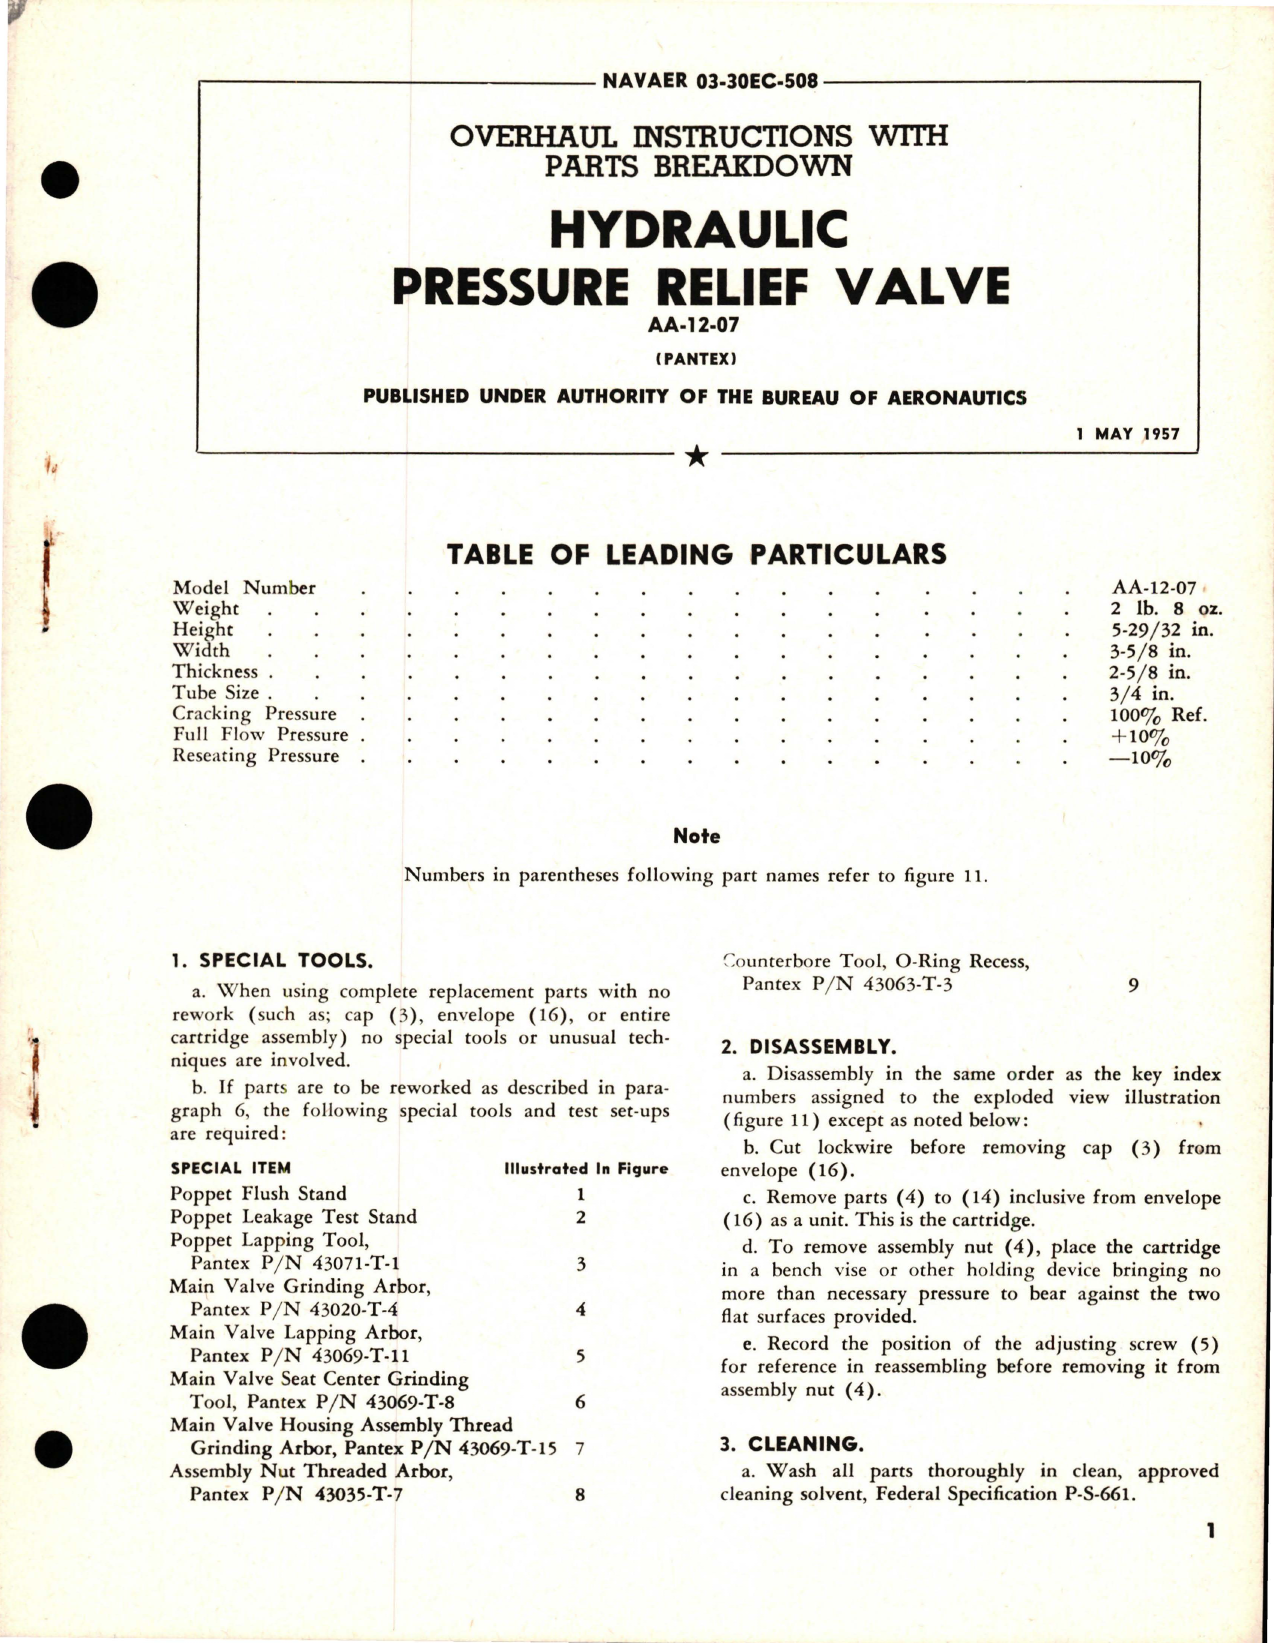 Sample page 1 from AirCorps Library document: Overhaul Instructions with Parts Breakdown for Hydraulic Pressure Relief Valve - AA-12-07